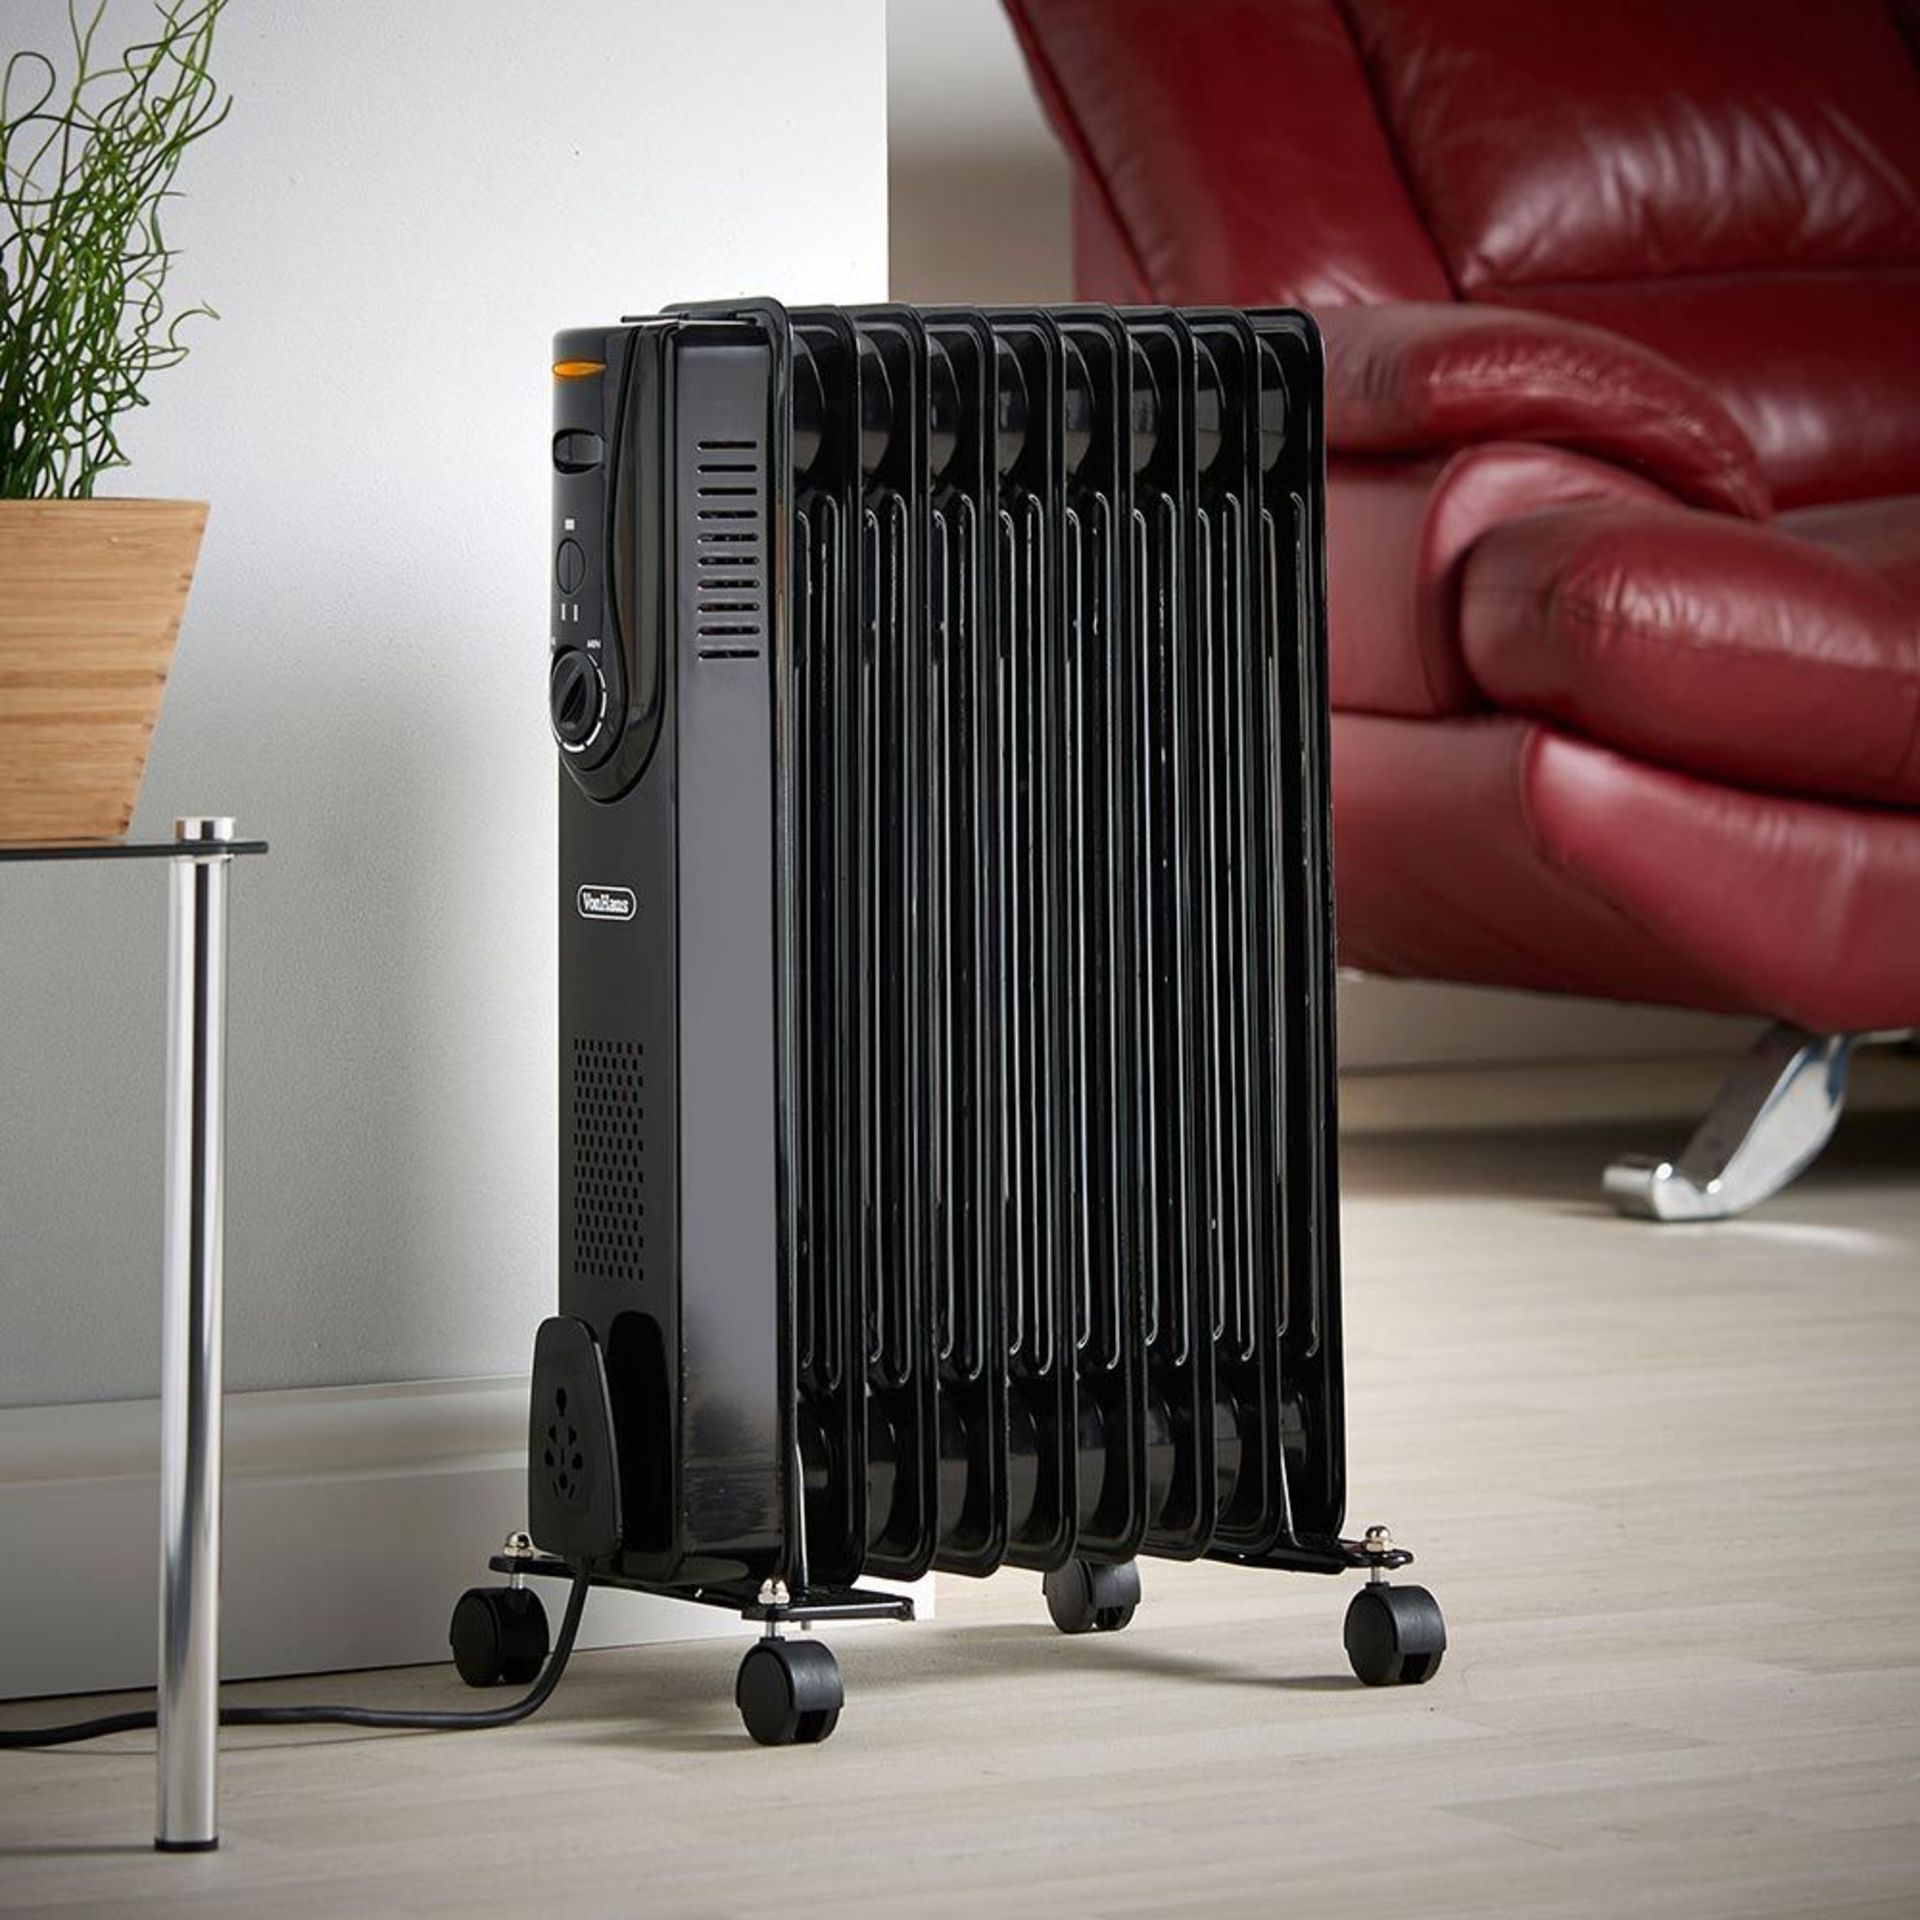 (CP107) 9 Fin 2000W Oil Filled Radiator - Black Powerful 2000W radiator with 9 oil-filled fins... - Image 2 of 4